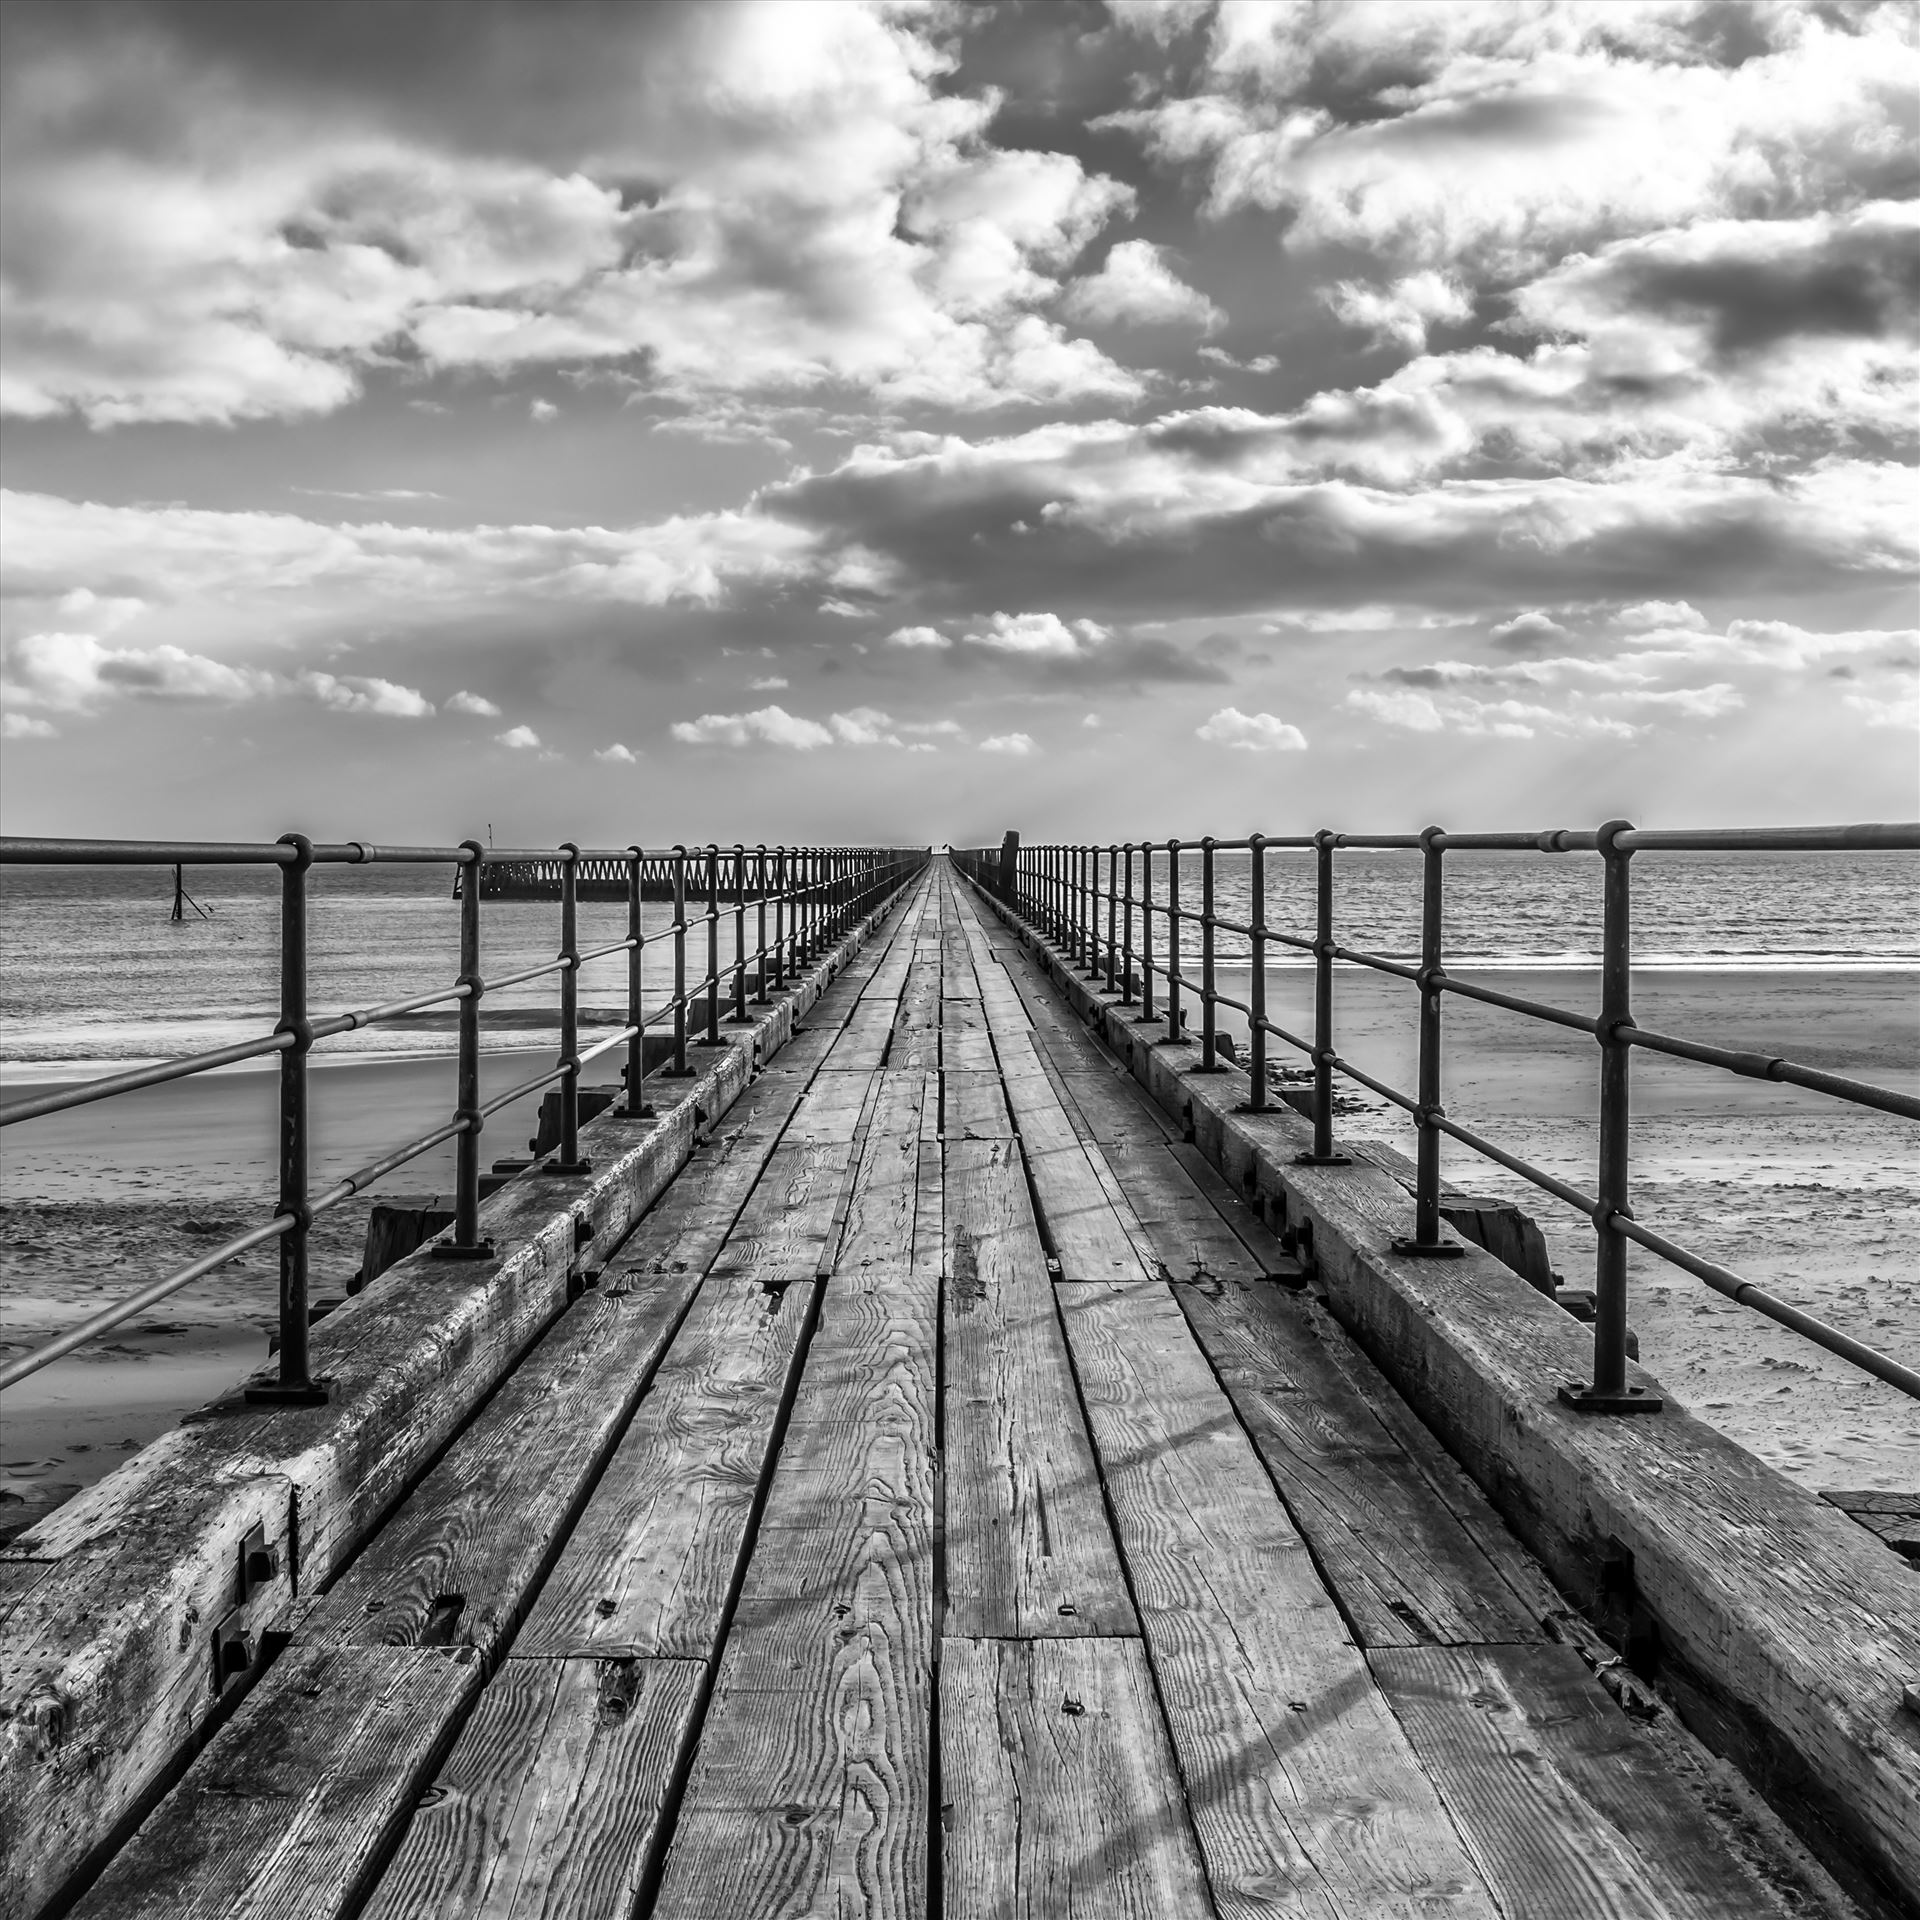 Blyth Pier, Northumberland, in B/WAlso available in Colour.